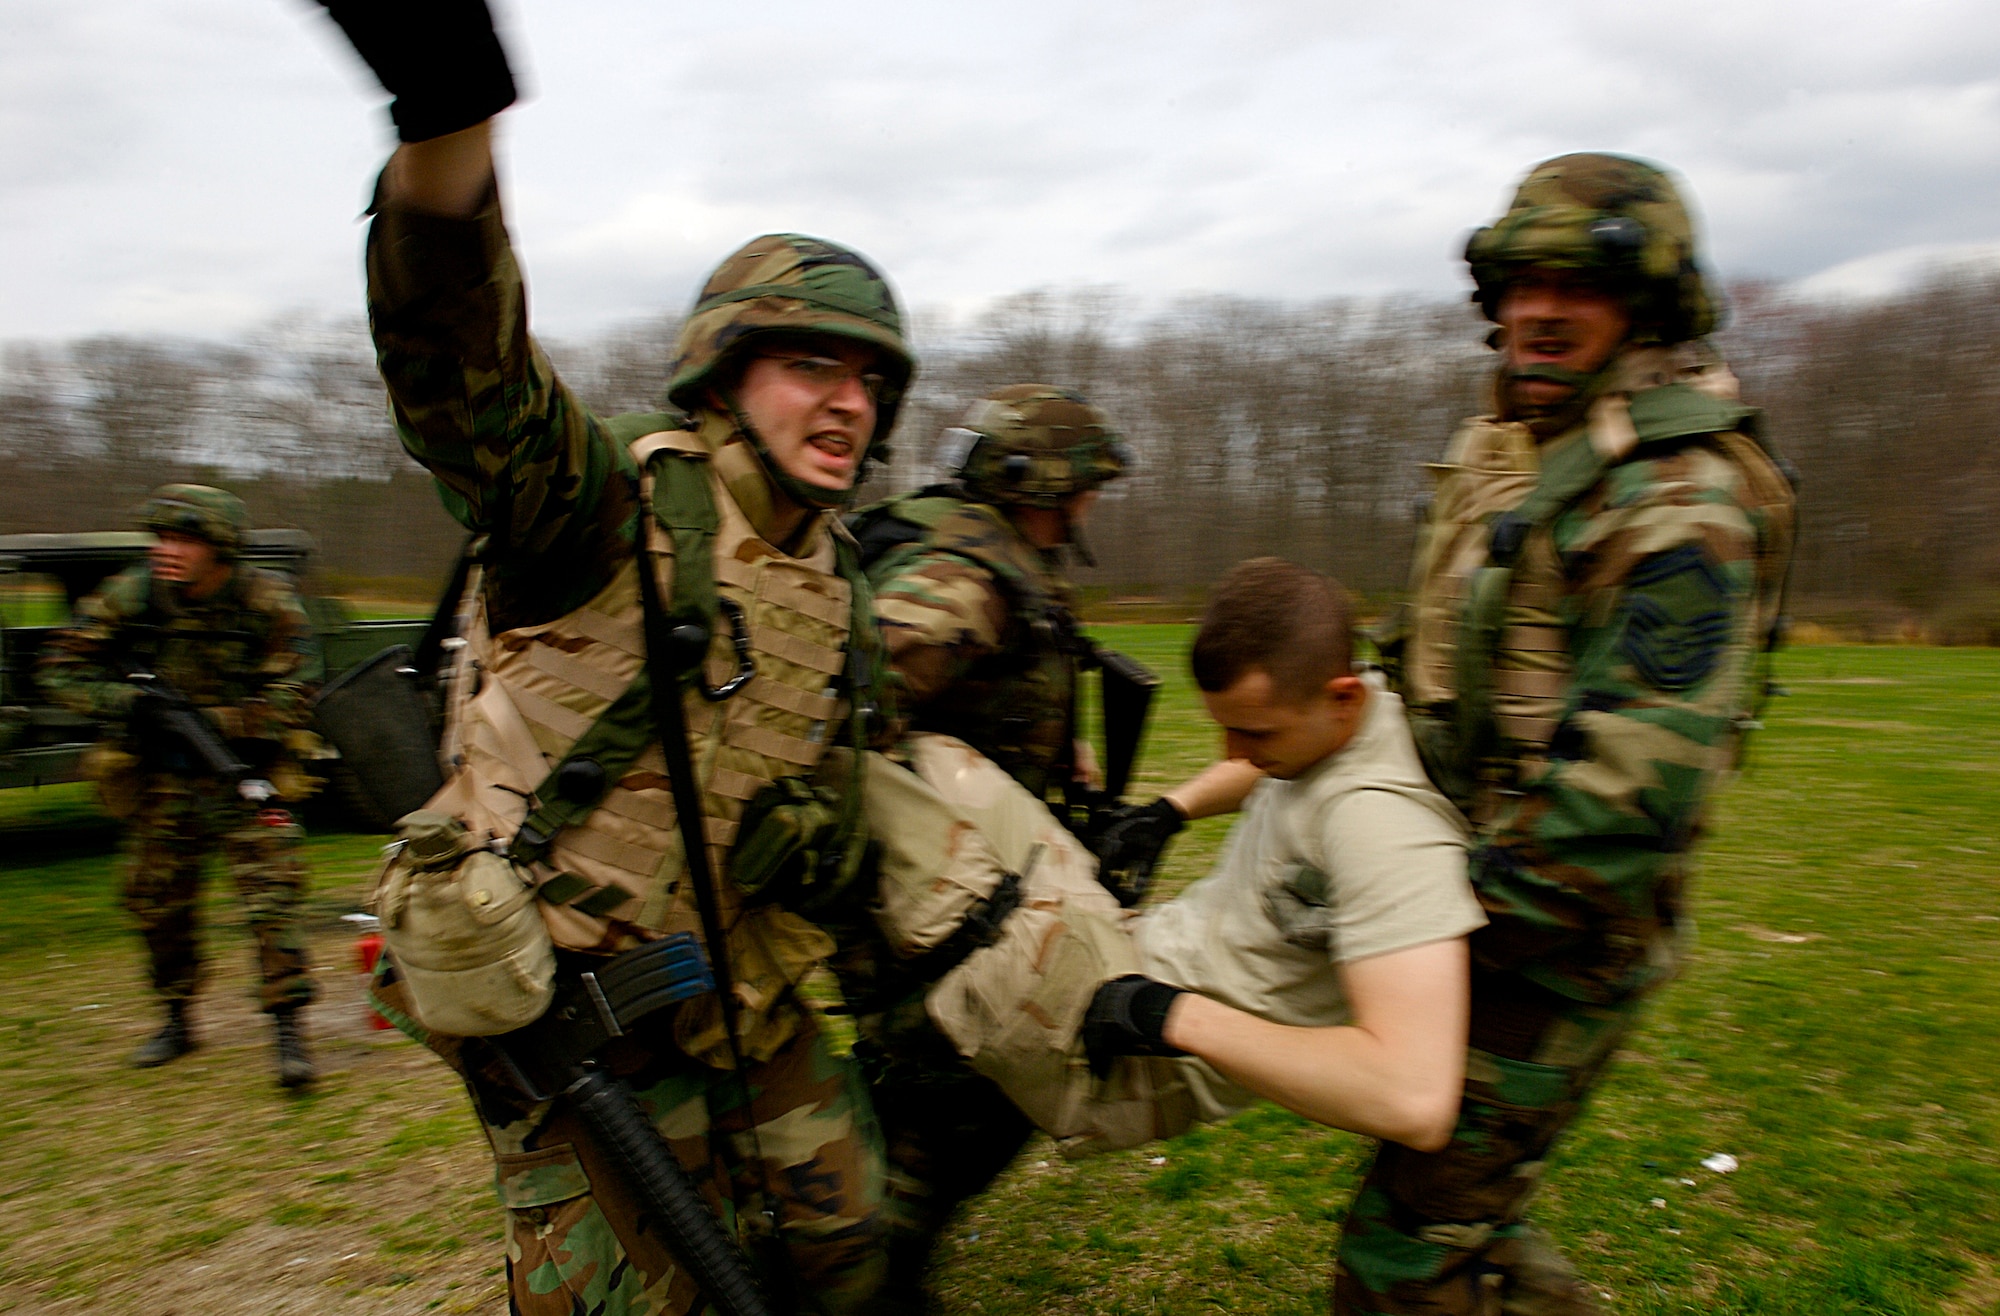 Staff Sgt. Benjamin Kramer (left), Senior Master Sgt. Robert Mayor (right) and 1st Lt. Brandon Vigneron (rear right), all students  in Advanced Contingency Skills Training Course 08-4, carry a simulated wounded patient to a safe area during the combat first aid portion of the ACST course on a Fort Dix, N.J., range April 11, 2008. (U.S. Air Force Photo/Staff Sgt Samuel Rogers)